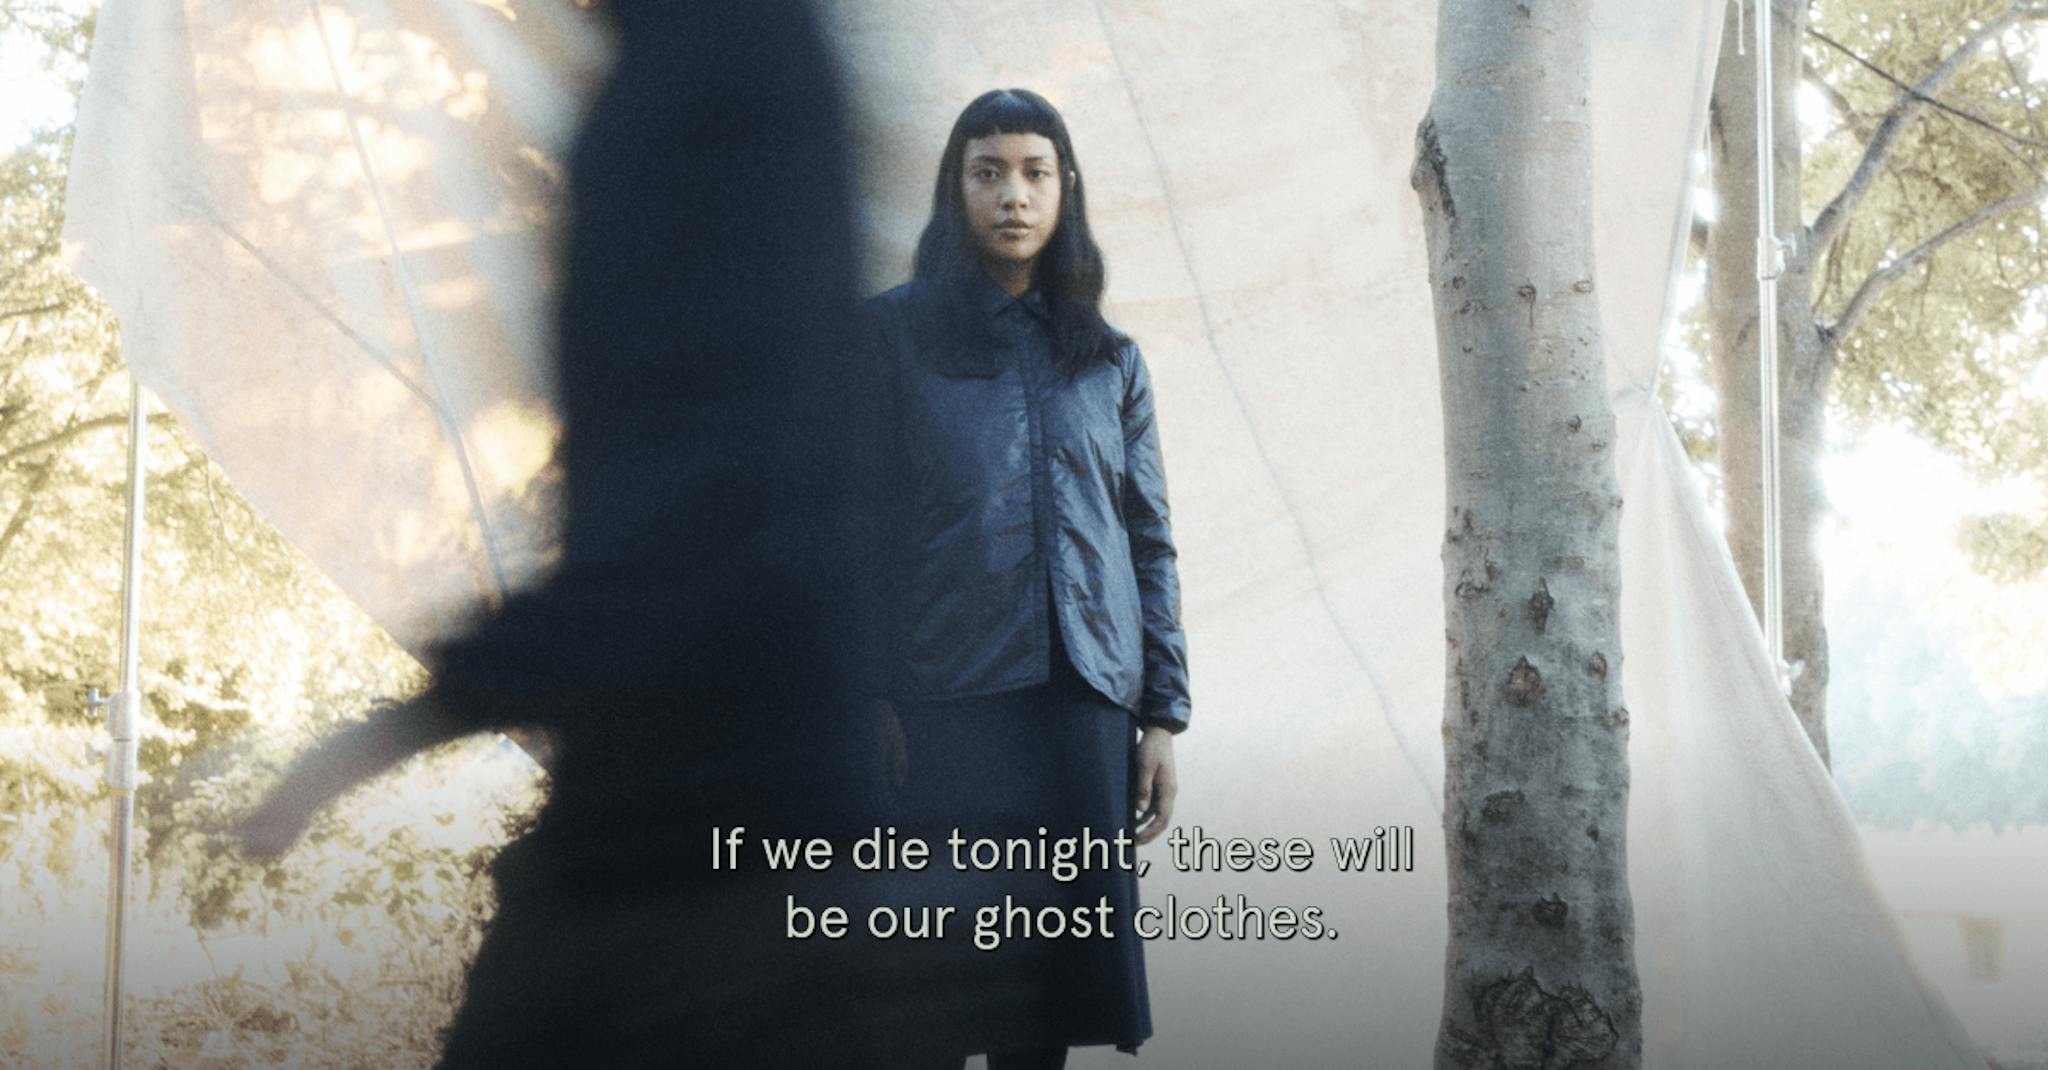 If we die tonight, these will be our ghost clothes.